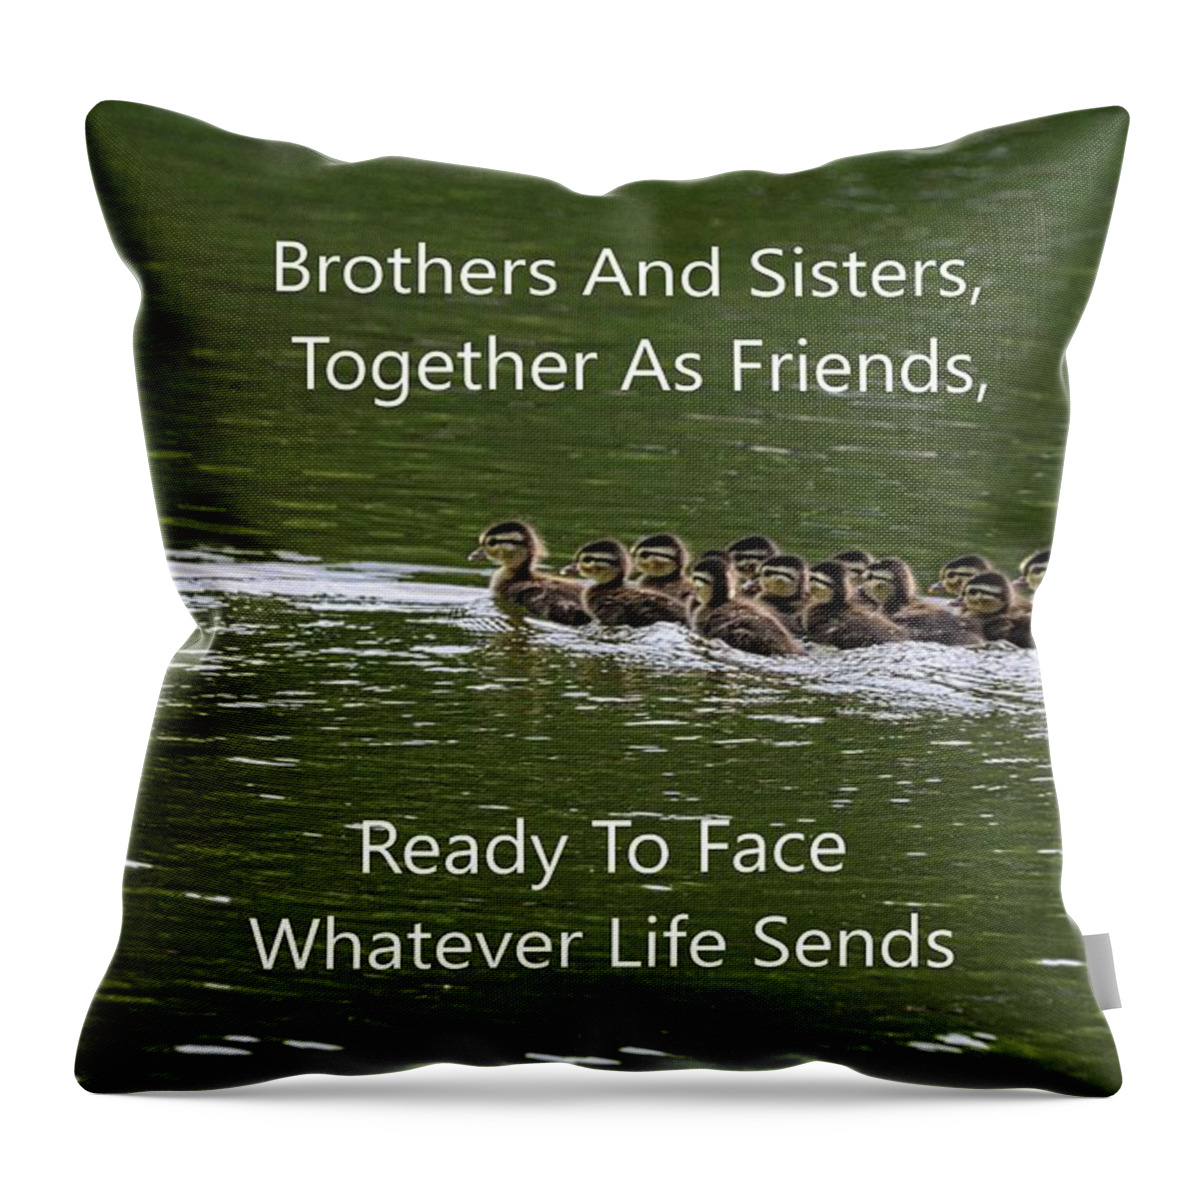 Brothers And Sisters Together As Friends Throw Pillow featuring the photograph Brothers And Sisters Together As Friends by Lisa Wooten